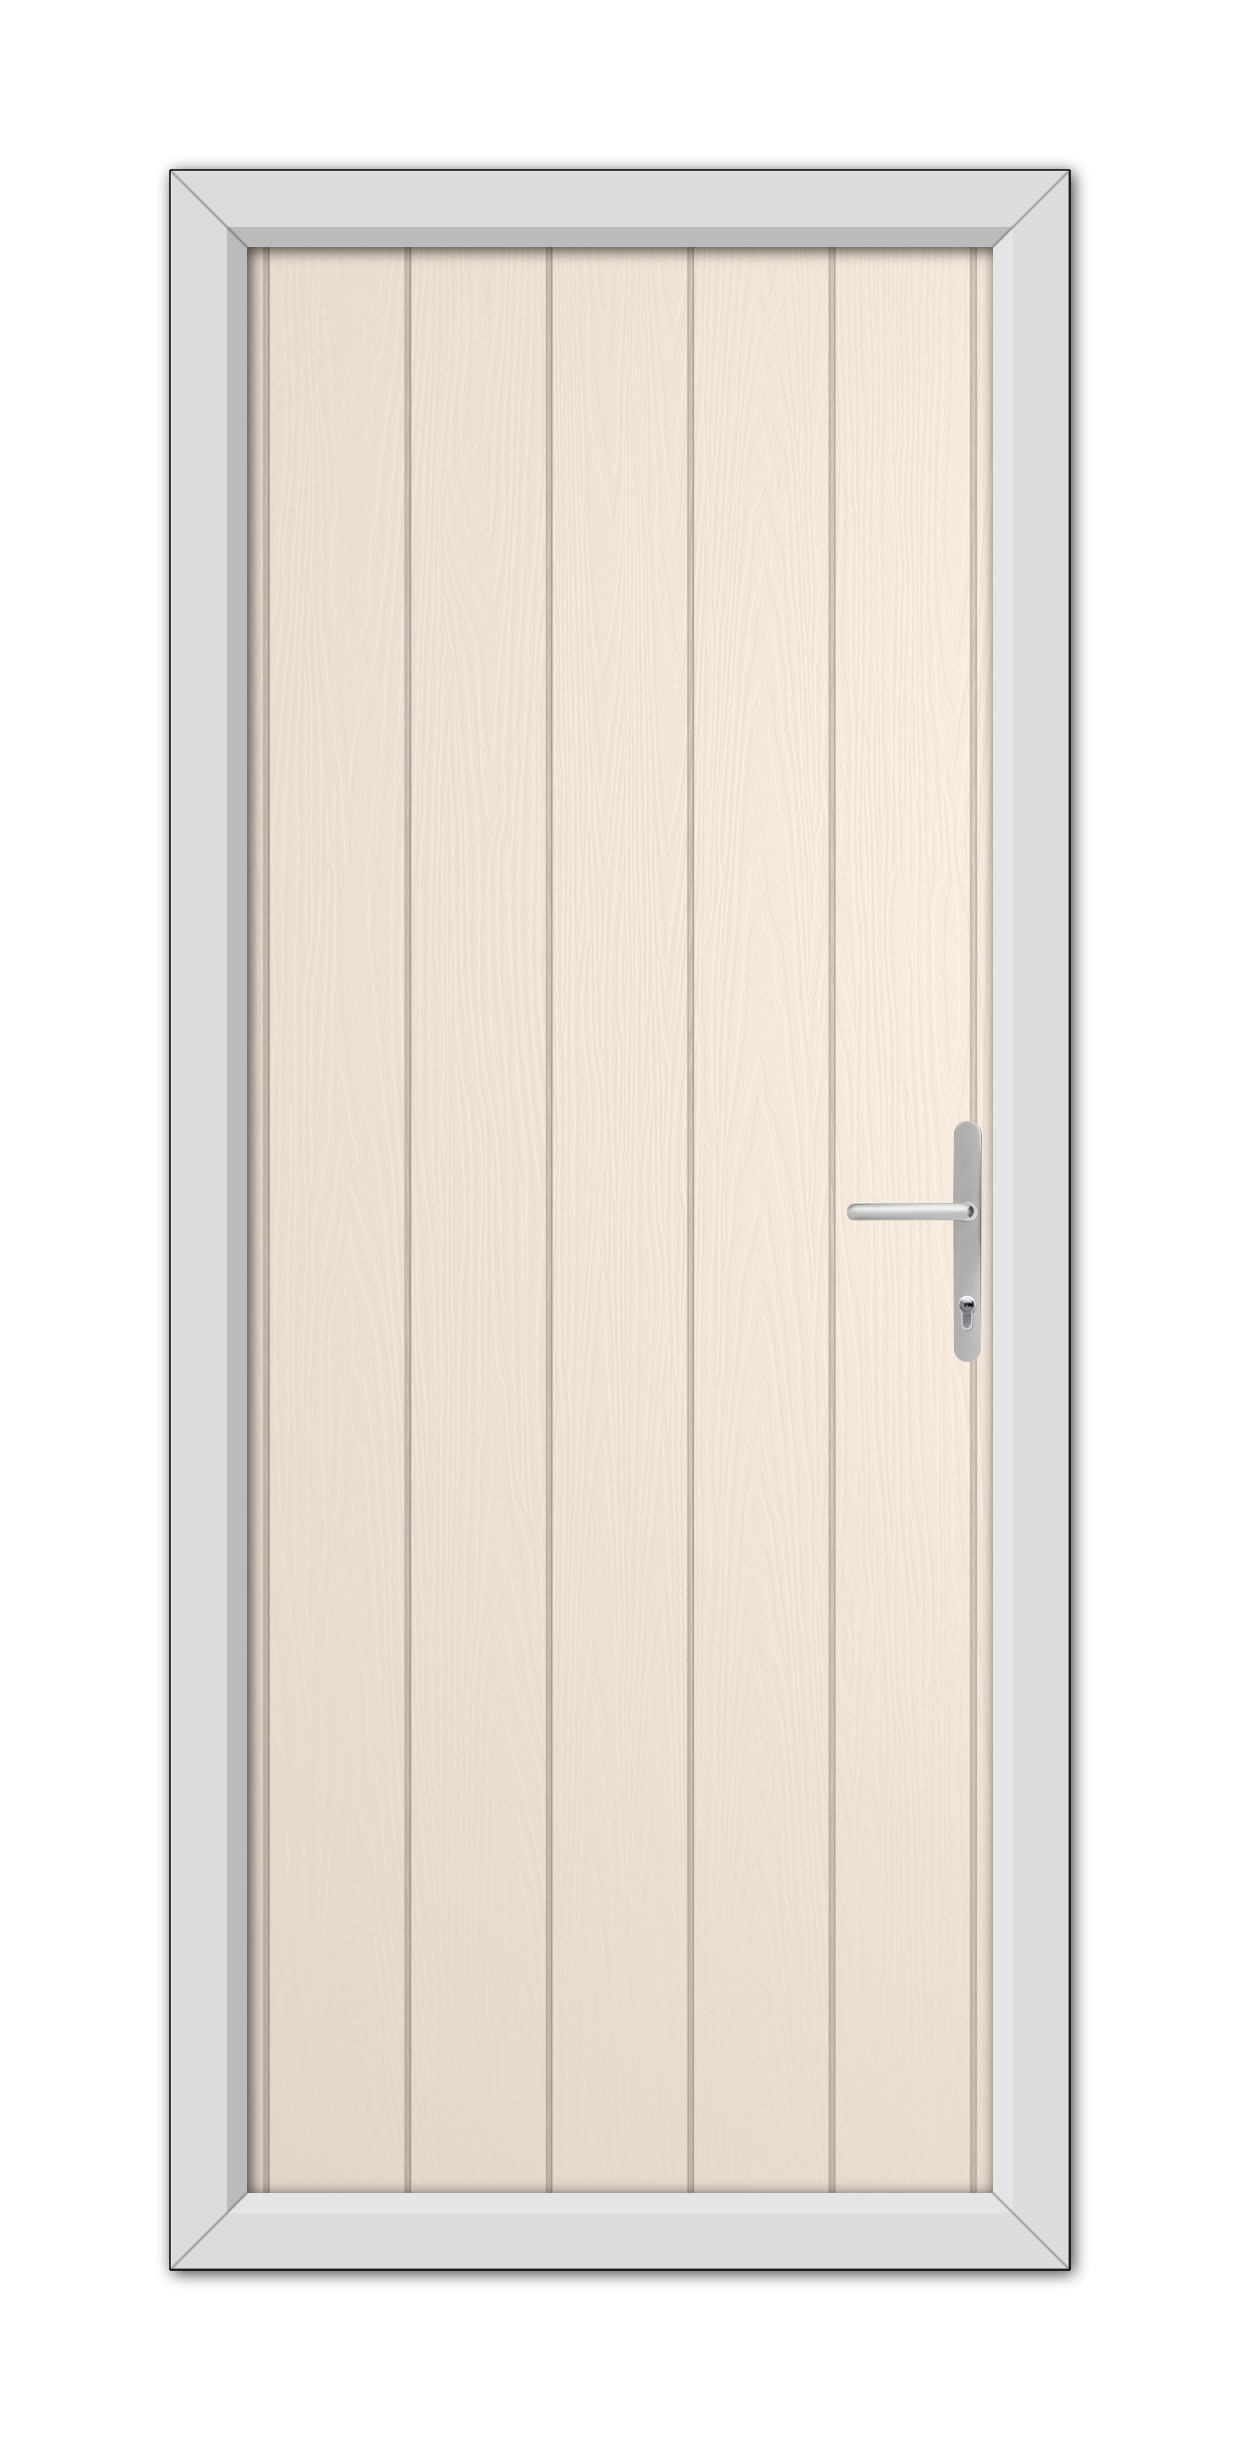 A Cream Gloucester Composite Door 48mm Timber Core with vertical panels and a silver handle, framed by a gray door frame, depicted against a white background.